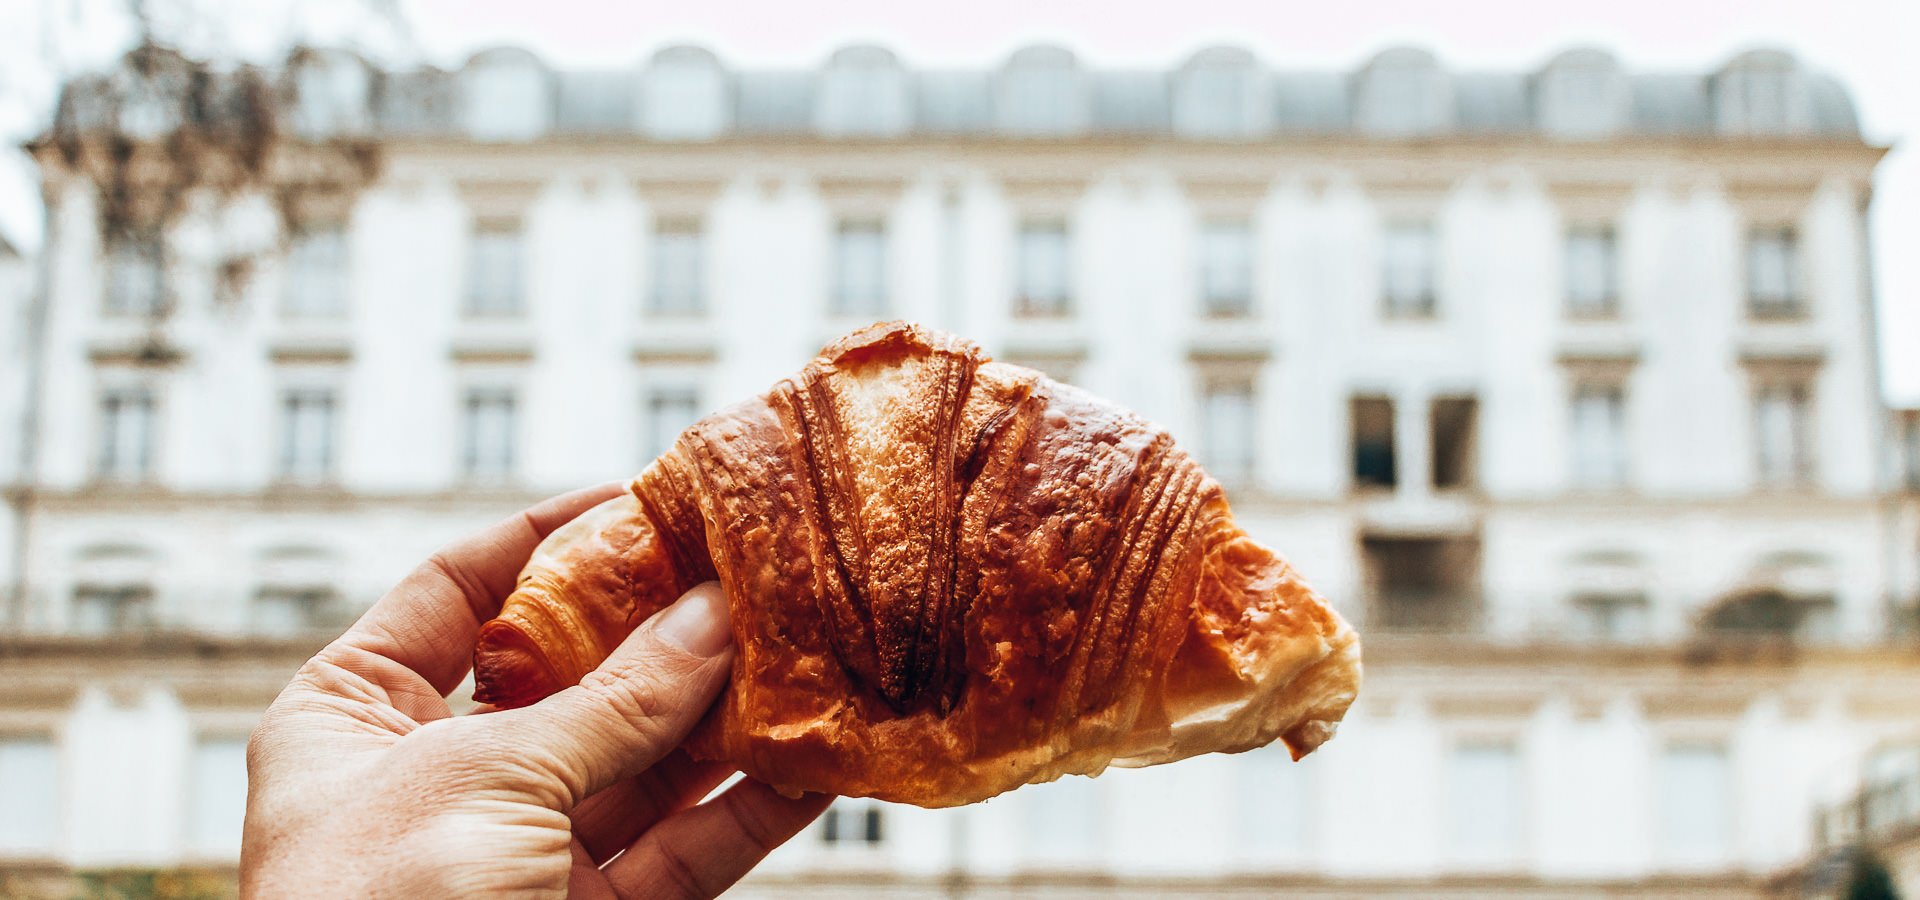 8 Of The Best Bakeries and Pâtisseries In Paris | dim sum in hong kong 4